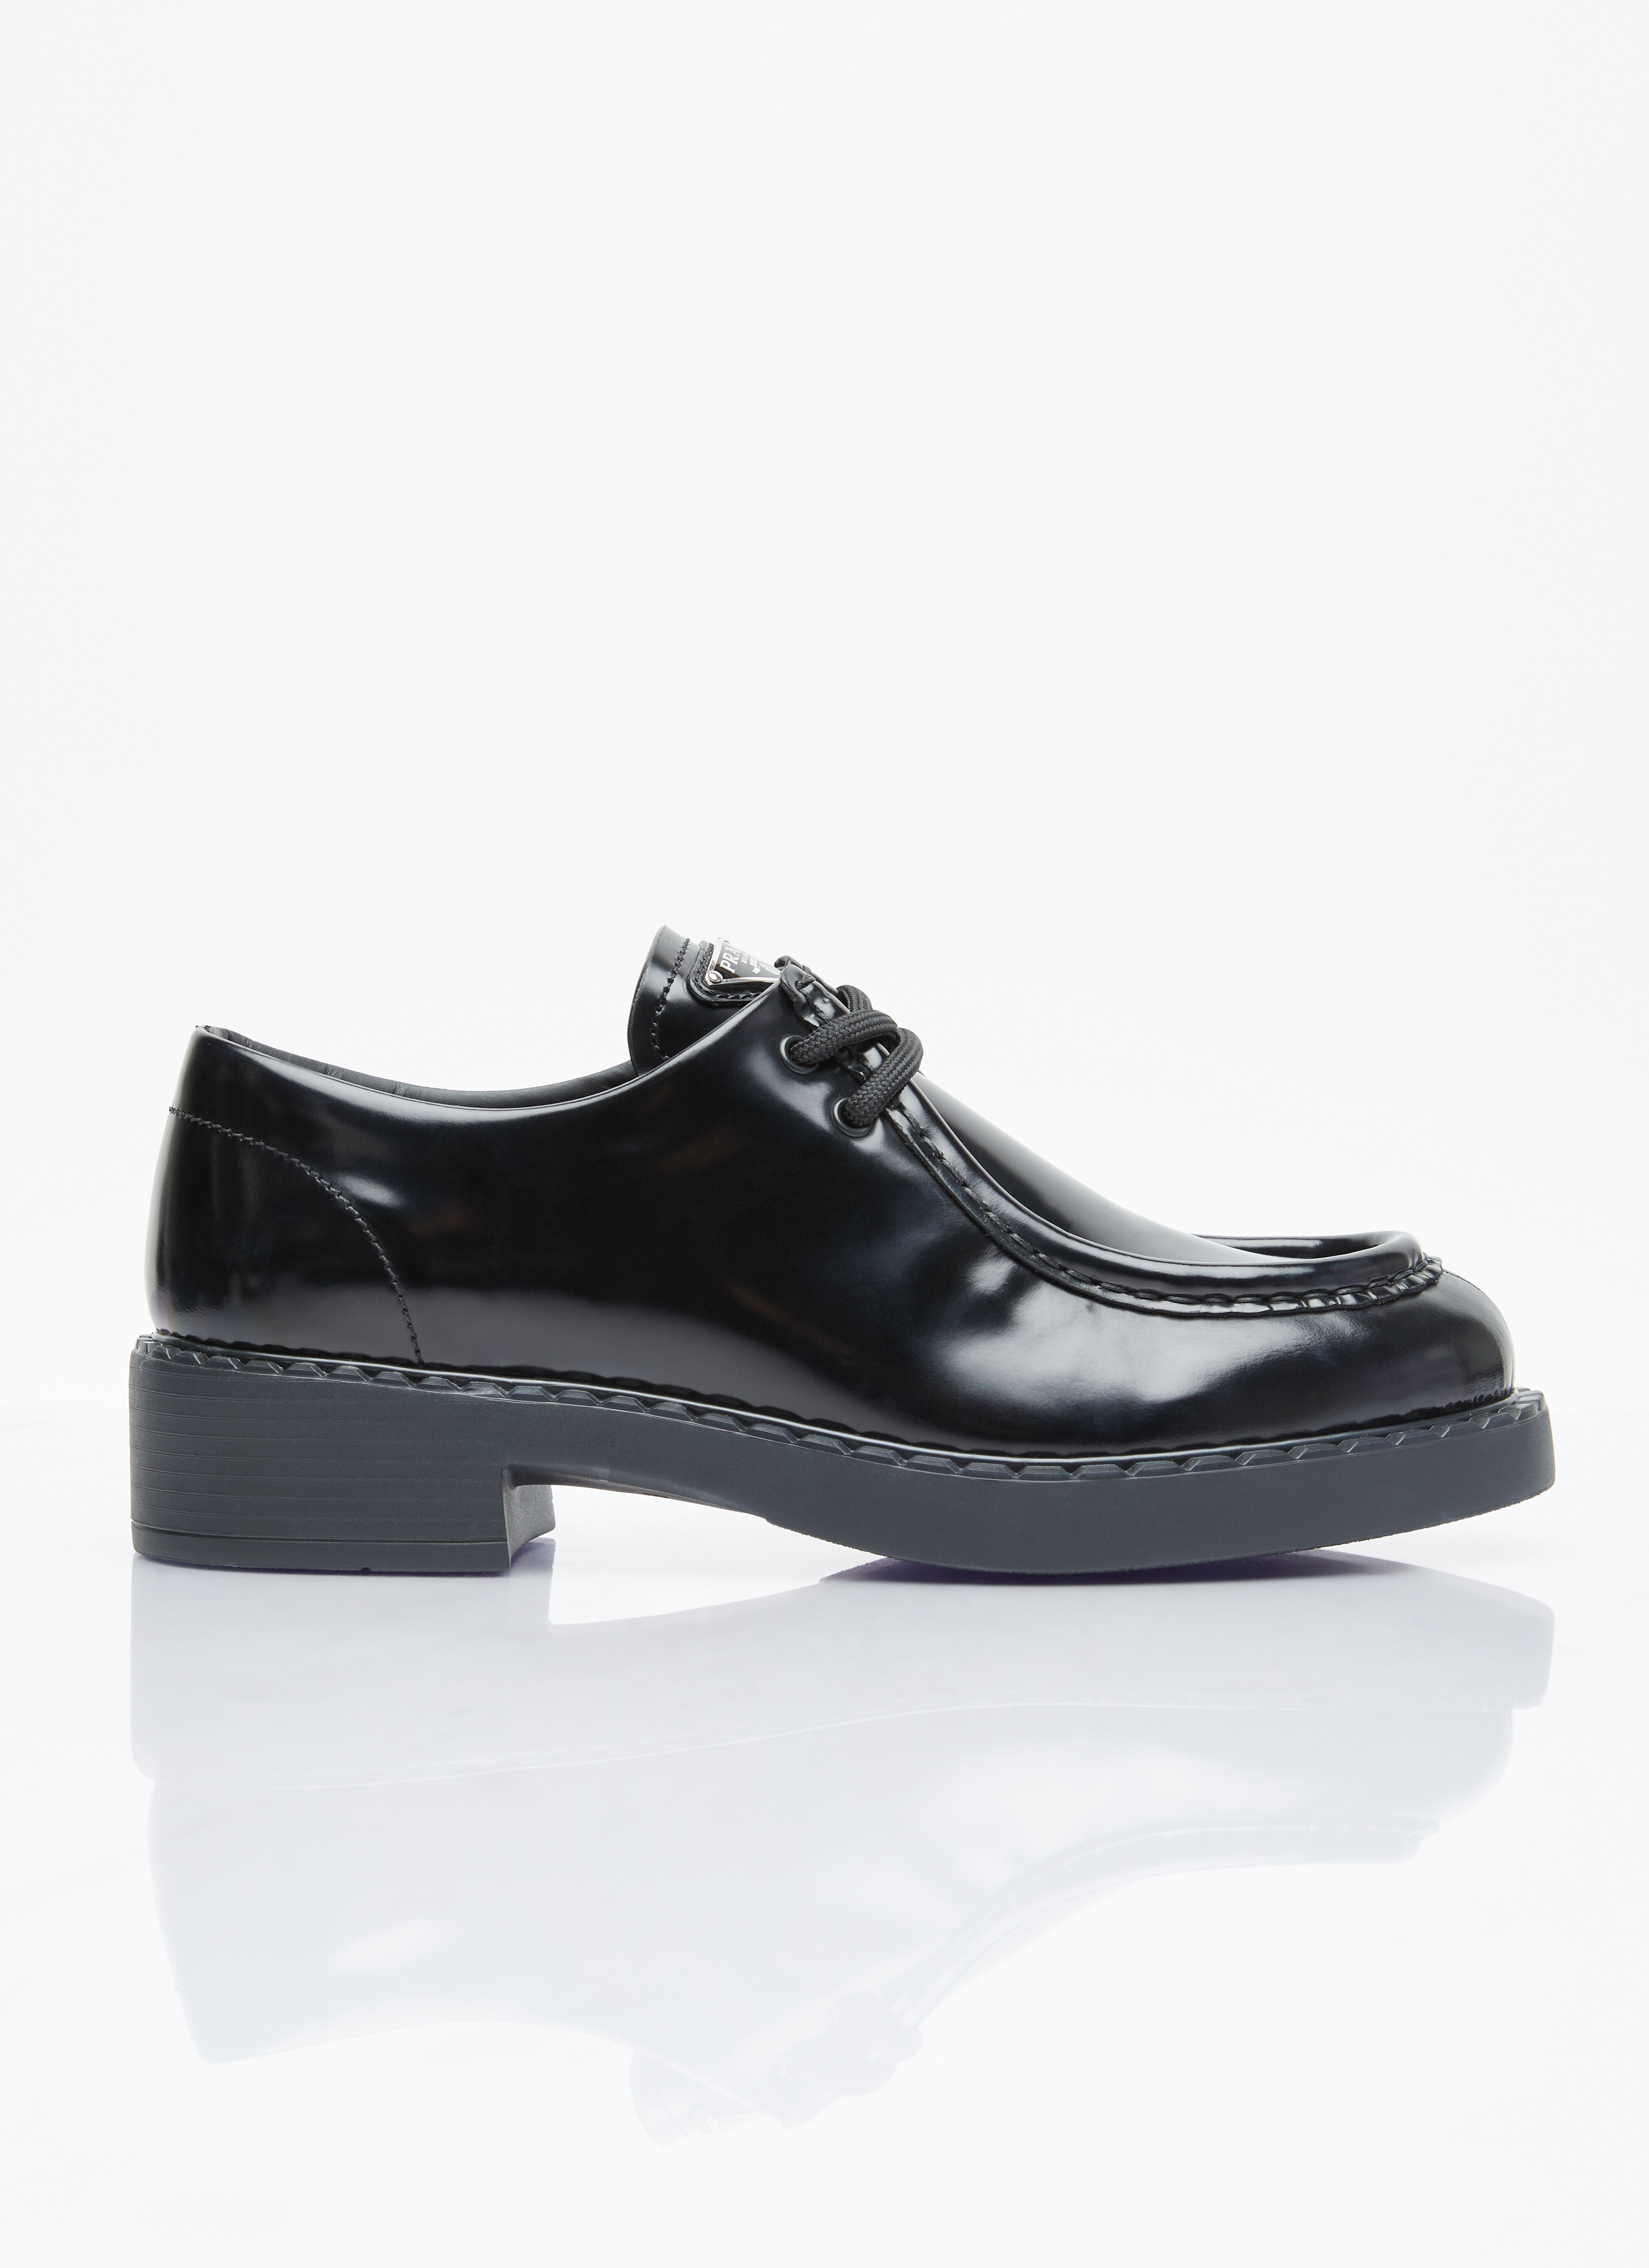 Gucci Brushed Leather Lace-Up Shoes Black guc0255064